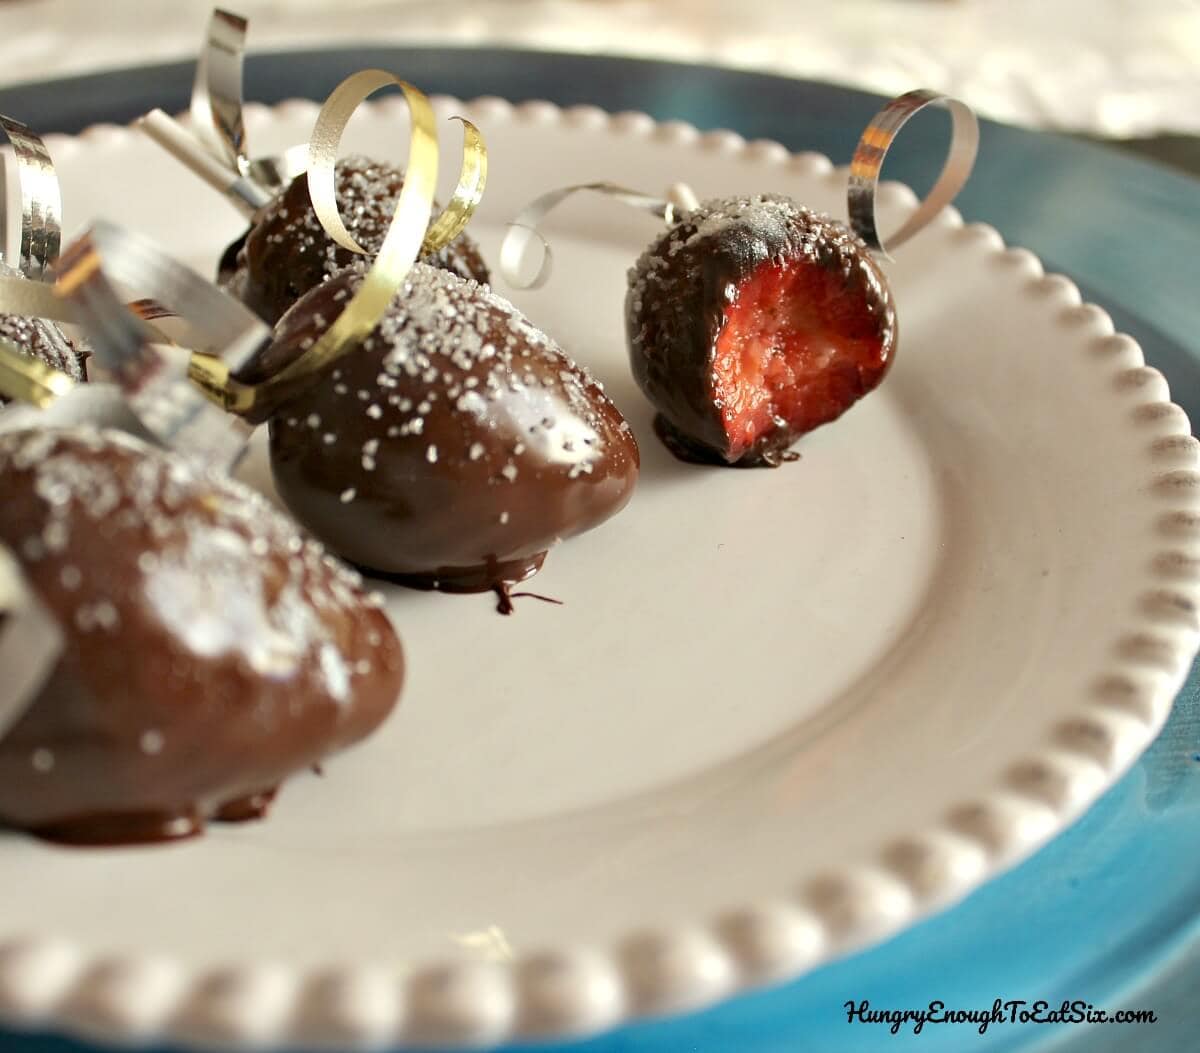 The classic, elegant dessert chocolate covered strawberries get a little bling! The sparkle and shine make these perfect for ringing in the new year!